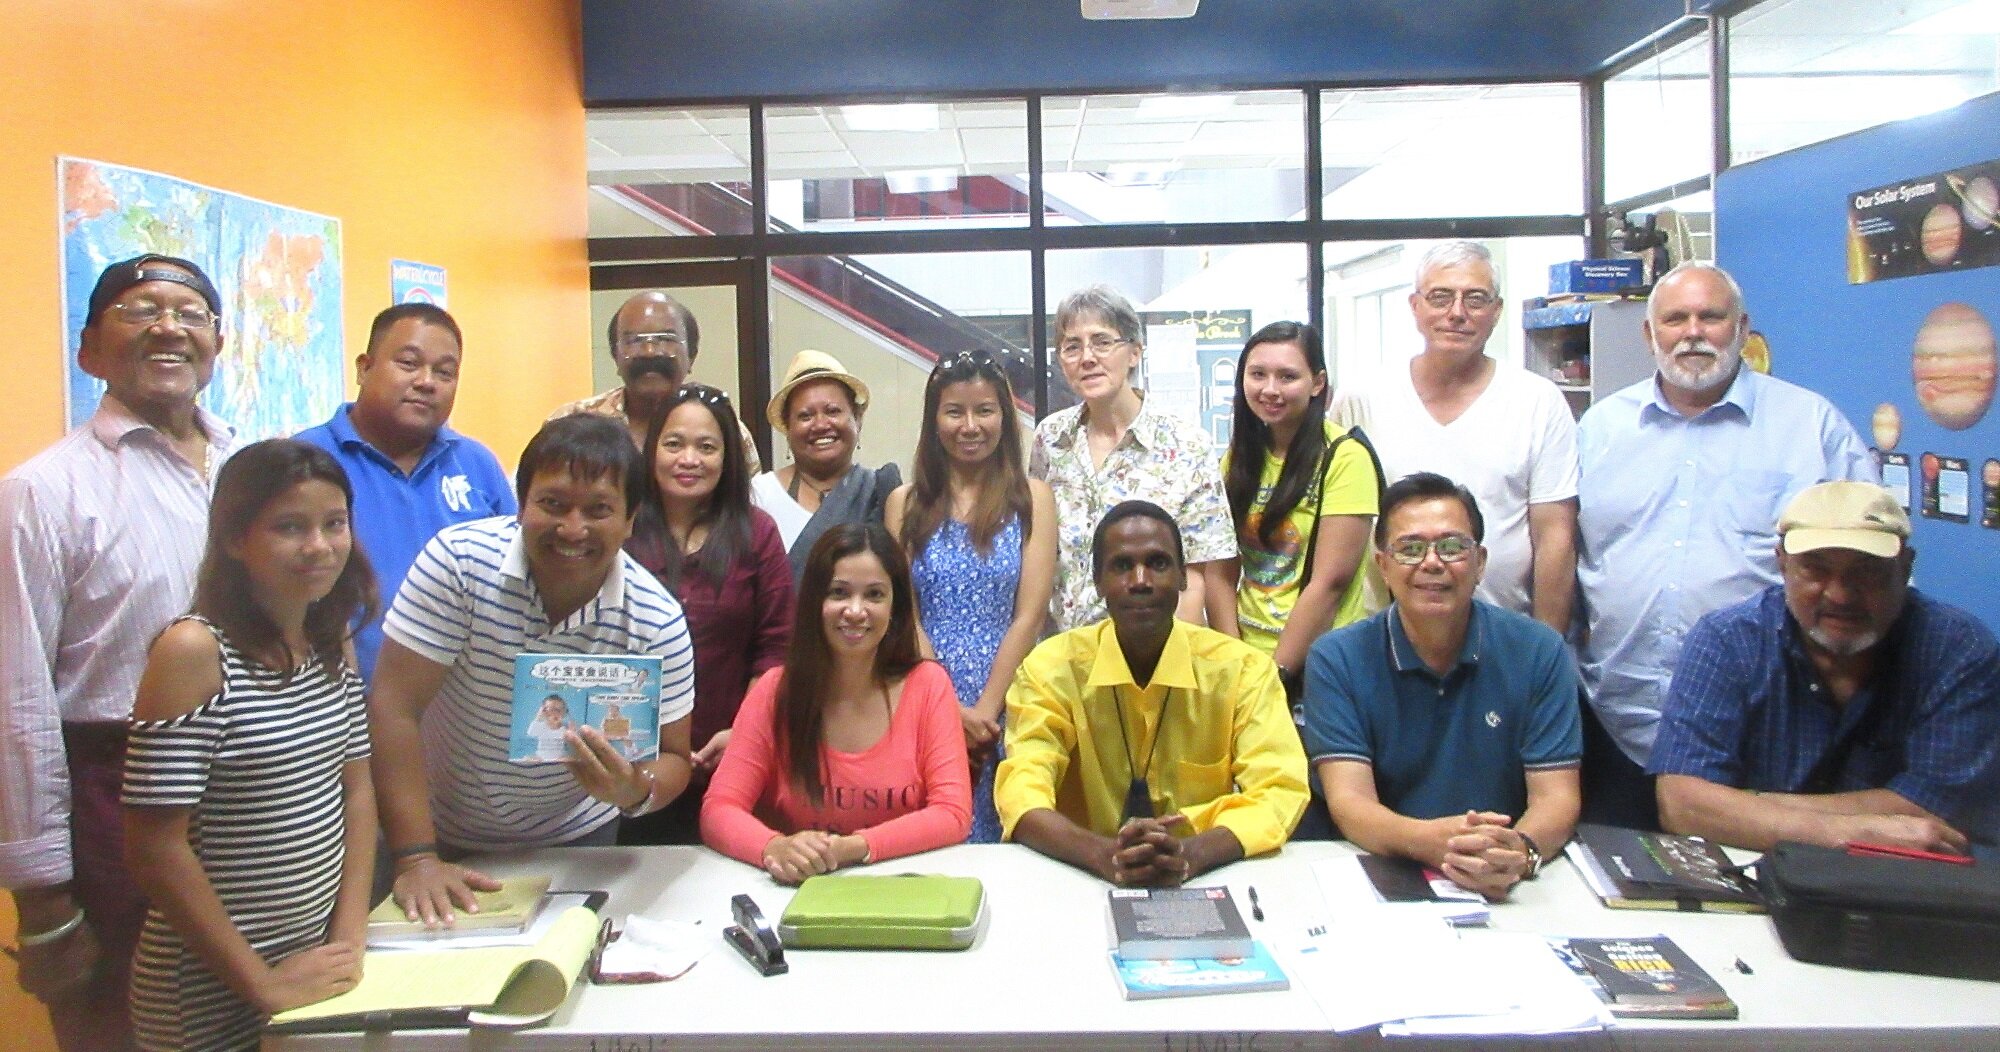 Aspiring and published writers from a wide range of backgrounds, passions and ages attend Walt's Writer's Workshop at Northern Marianas International School Back: John J. (NMIS Principal), Marlon R., Joe H., Riza R., Tim A, Cherry dG., Maryann H., Emily D., Steve W., Gary L. Front: Alana P., George C., Rose E., Walt G. (Presenter), Louie A., Tony P. (April 8, 2017)